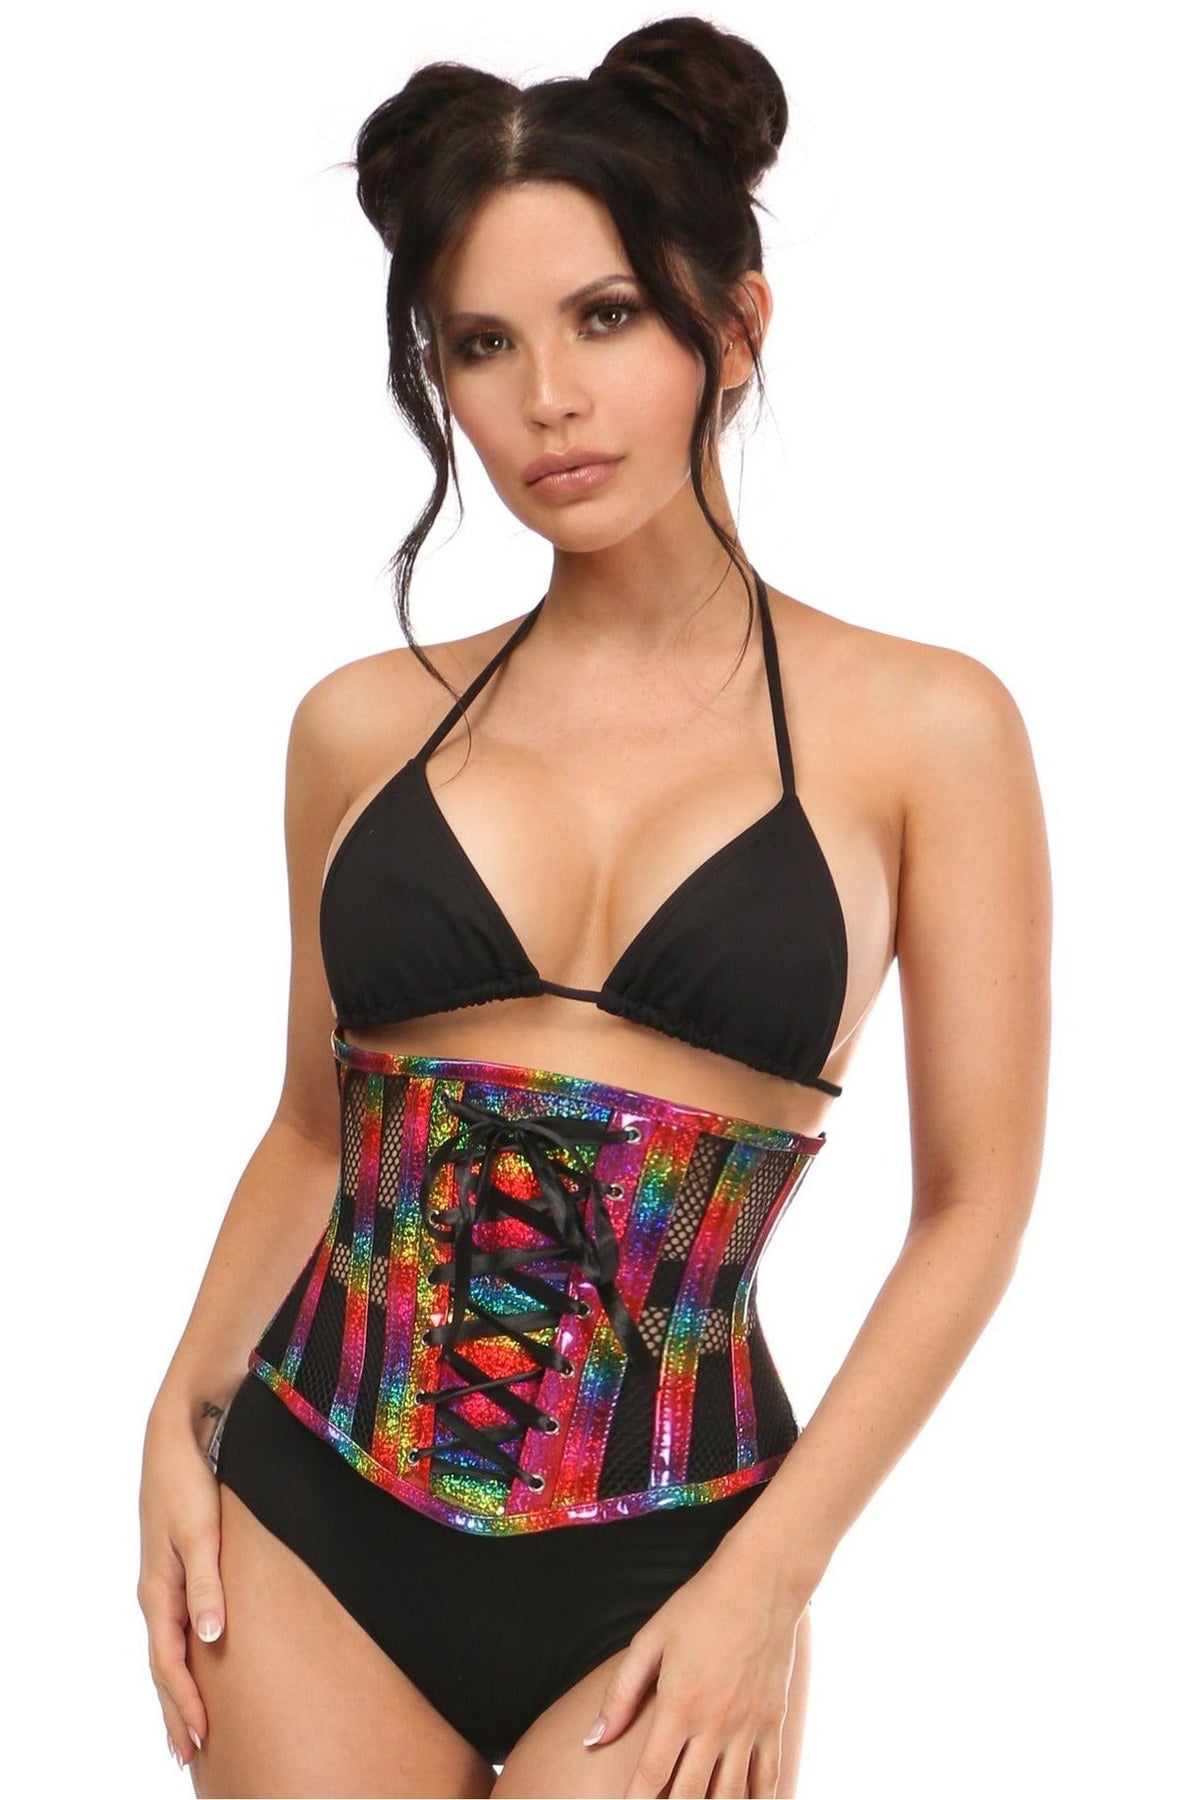 Top Drawer Rainbow Glitter PVC Steel Boned Underbust Corset w/Lace-Up Front-Daisy Corsets